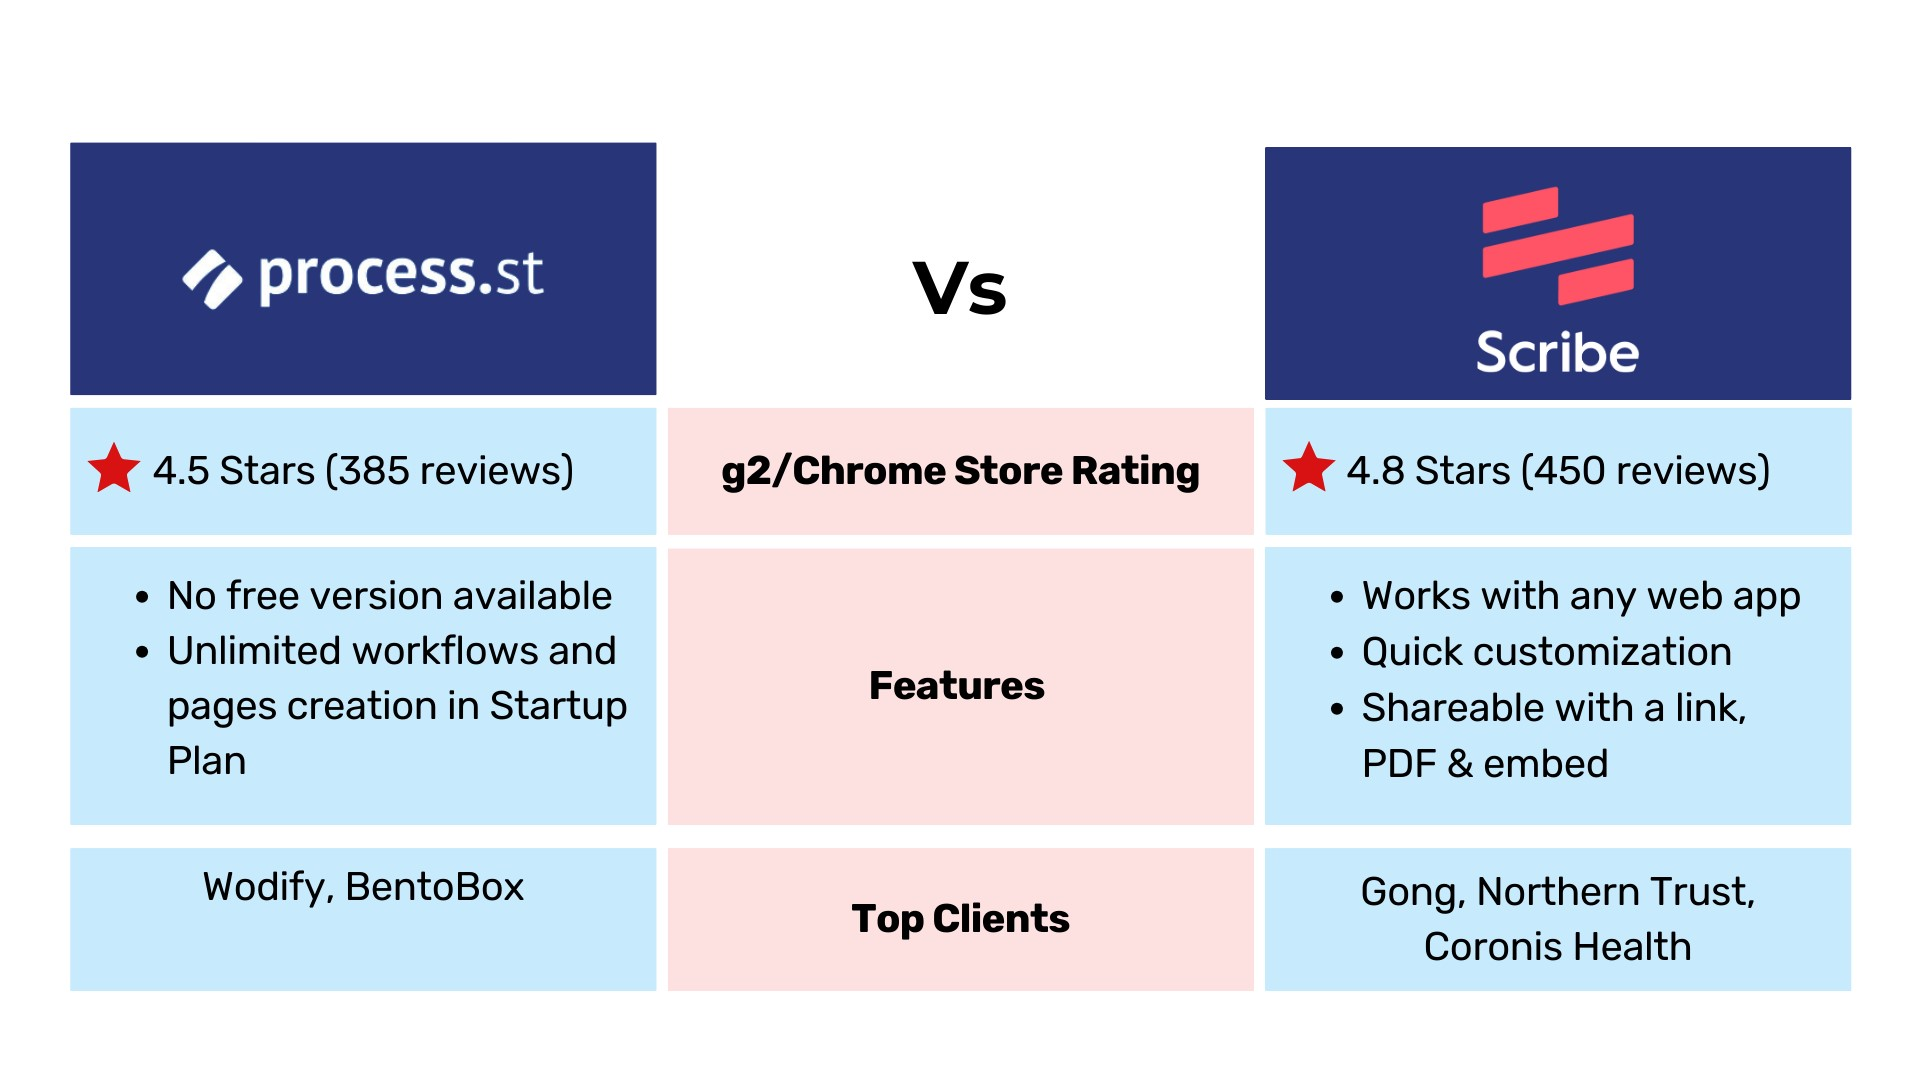 Process Street Vs Scribe comparison table with rating, features, top clients